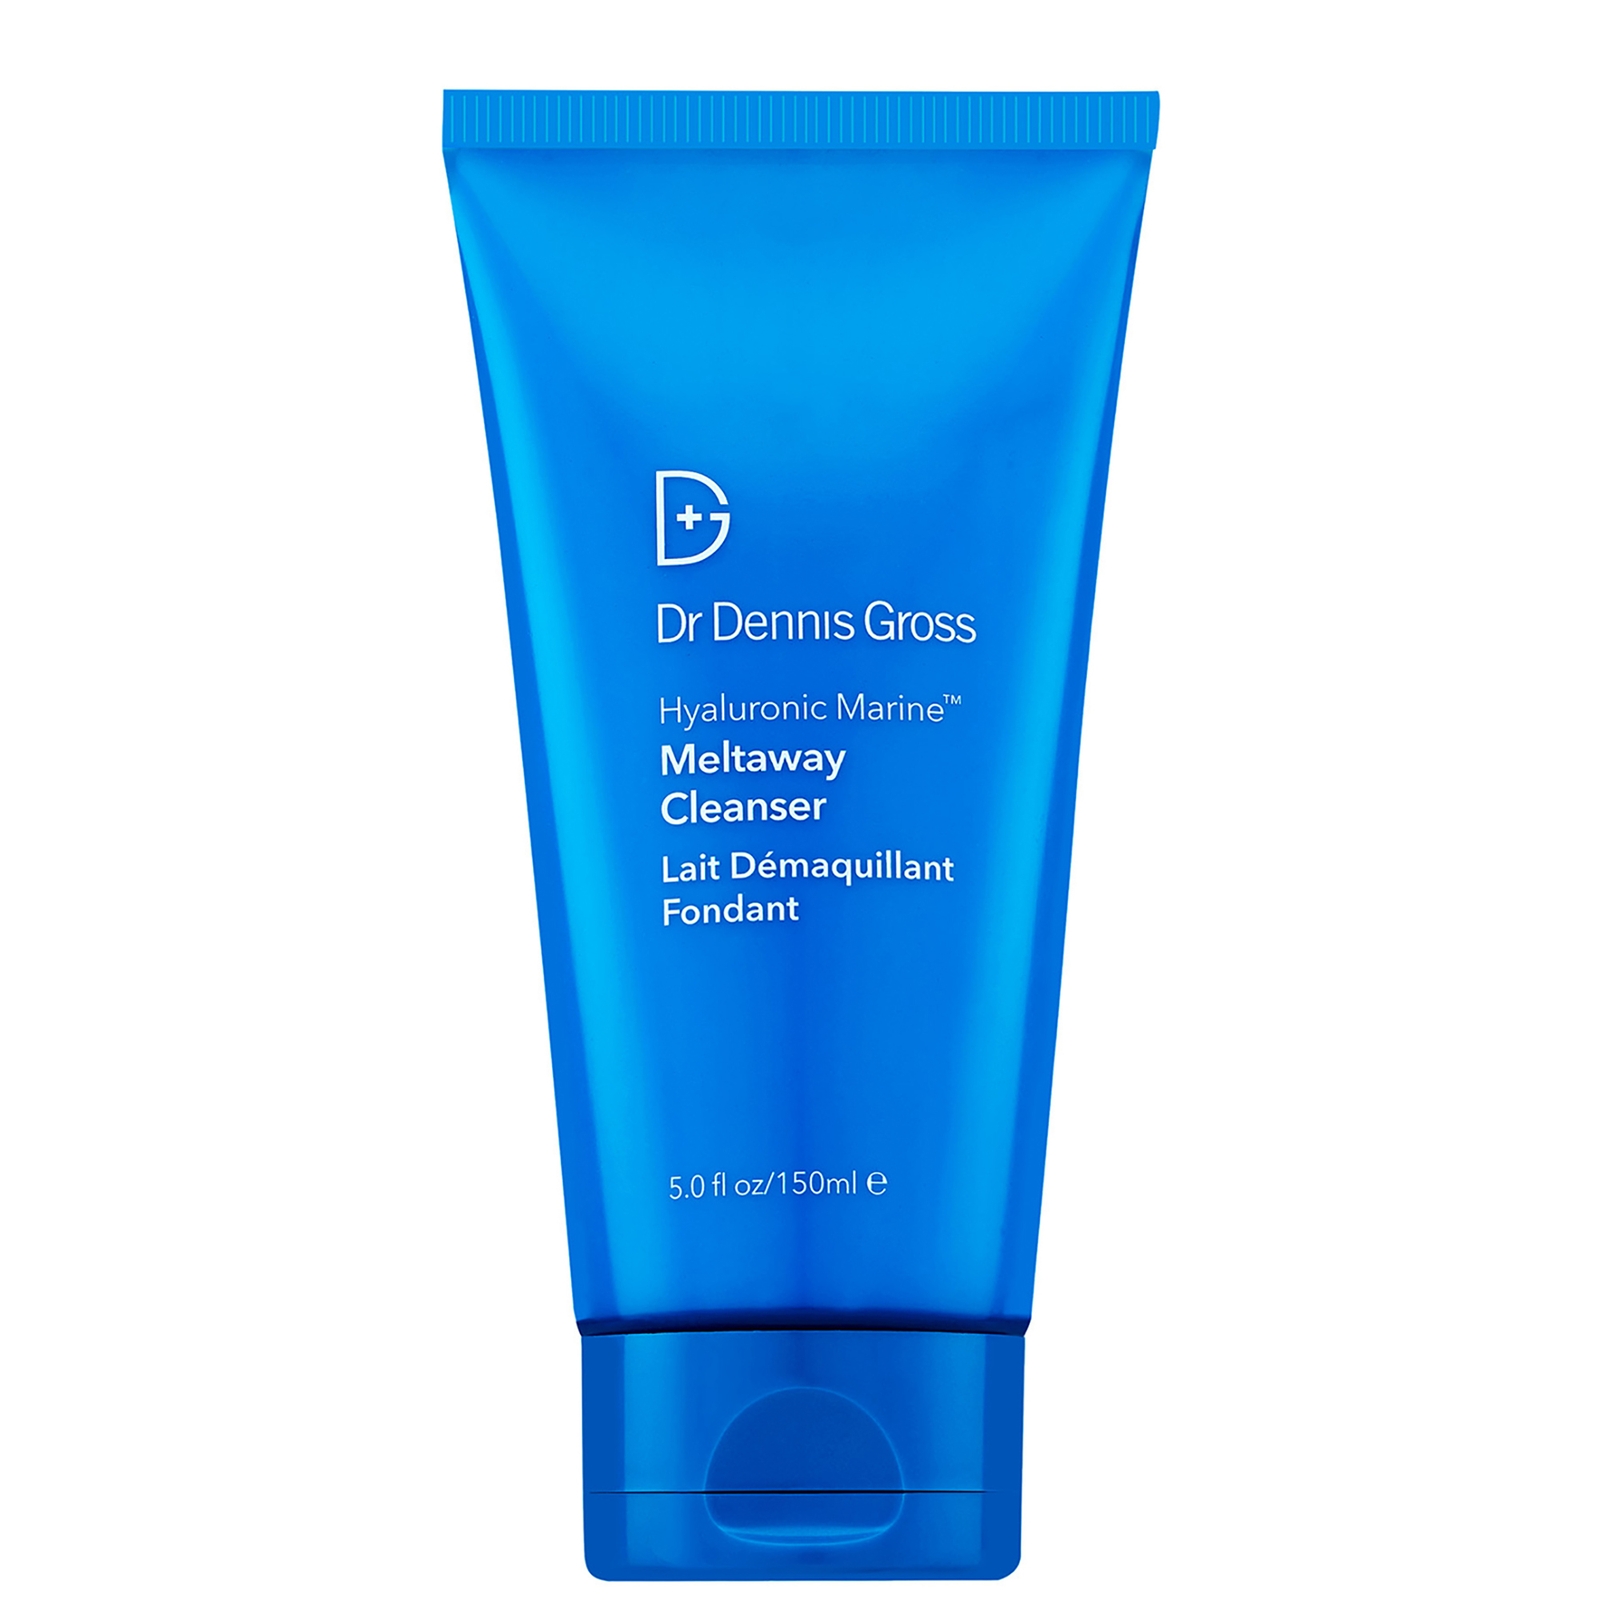 Photos - Facial / Body Cleansing Product Dr Dennis Gross Skincare Hyaluronic Marine Meltaway Cleanser 150ml BK54908